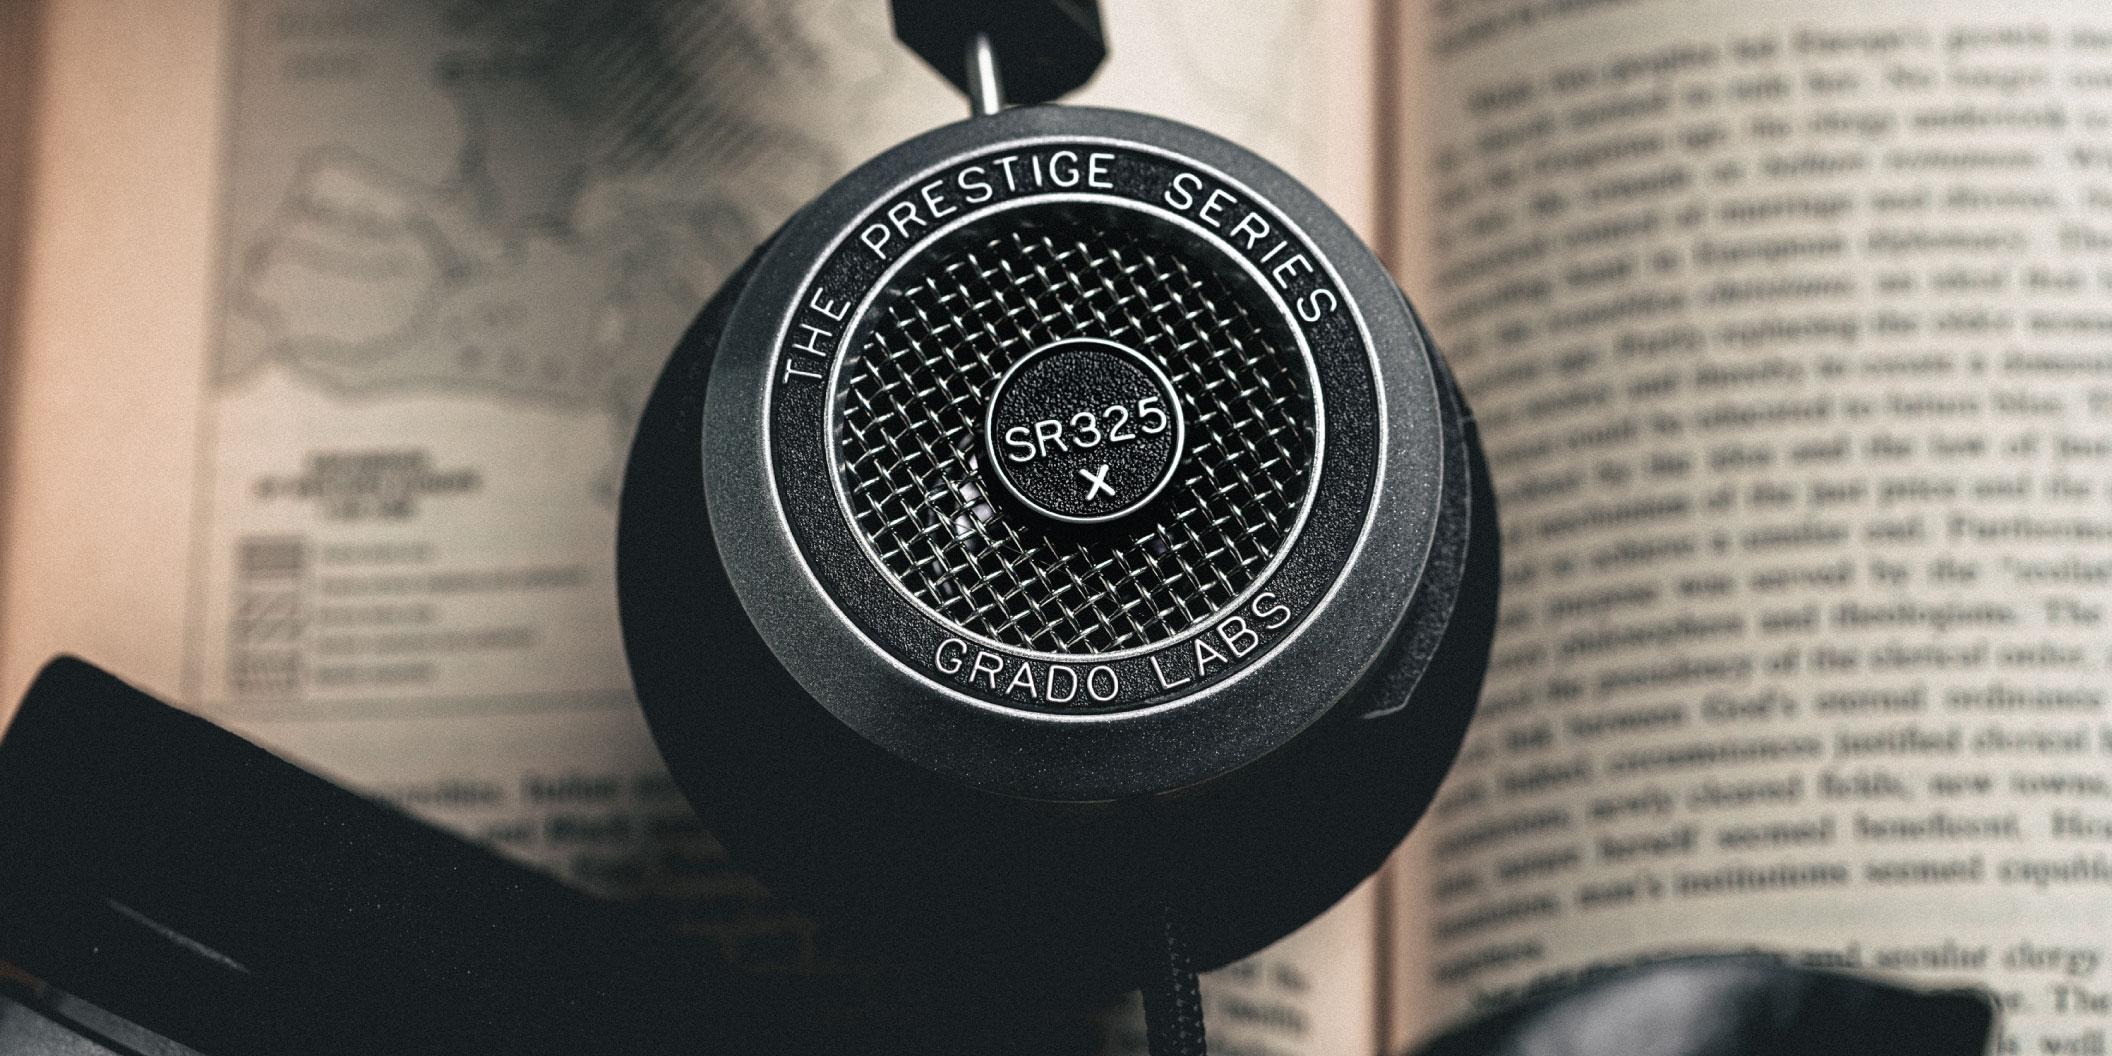 Photo of SR325x headphones sitting on top of an open book.